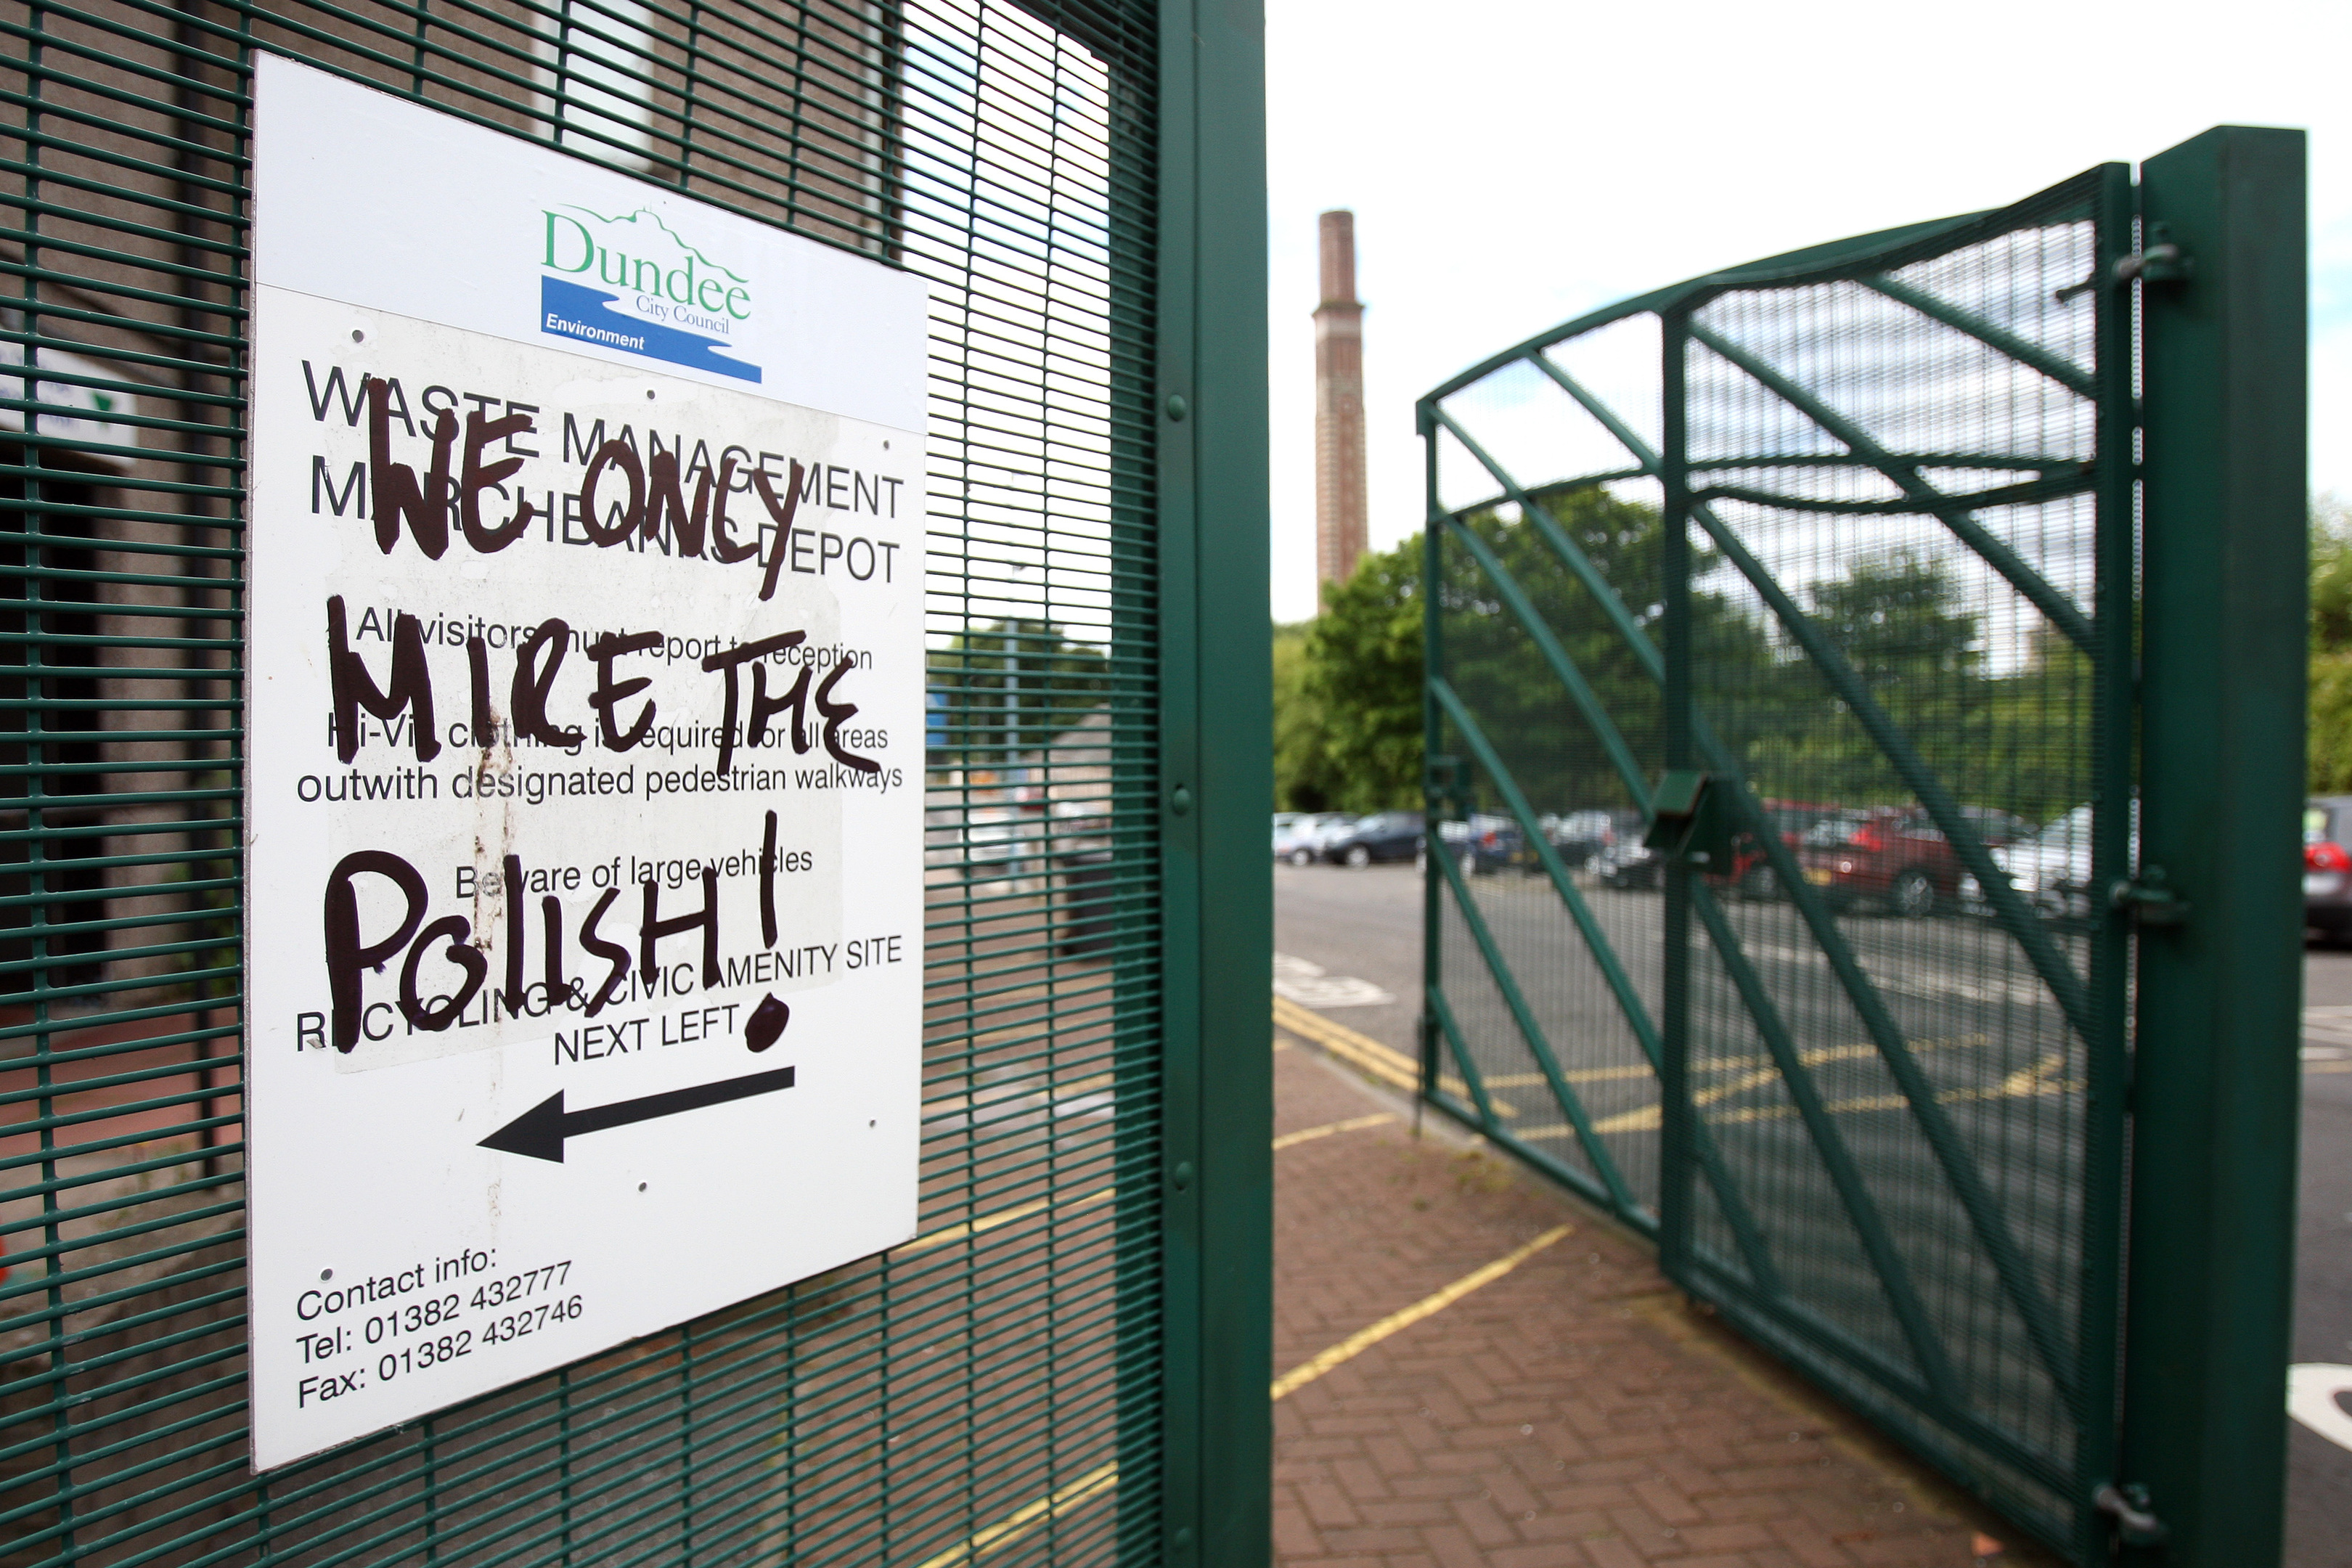 Anti Polish graffiti on a sign at Dundee City Council, Marchbanks Depot on Fairfield Road.